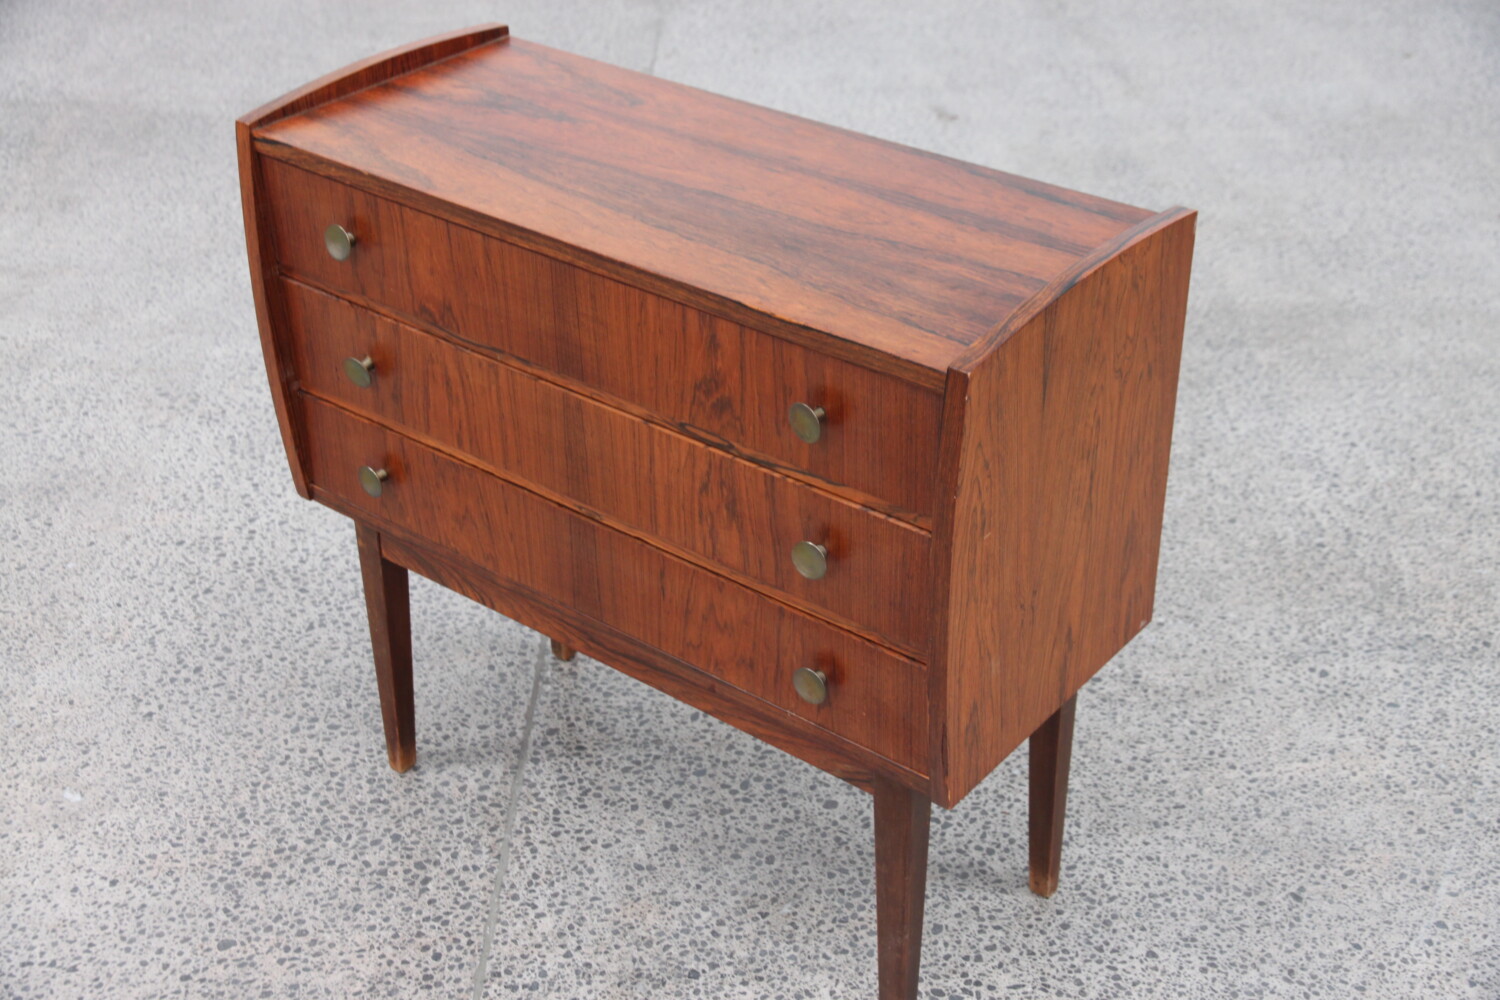 Rosewood Drawers sold